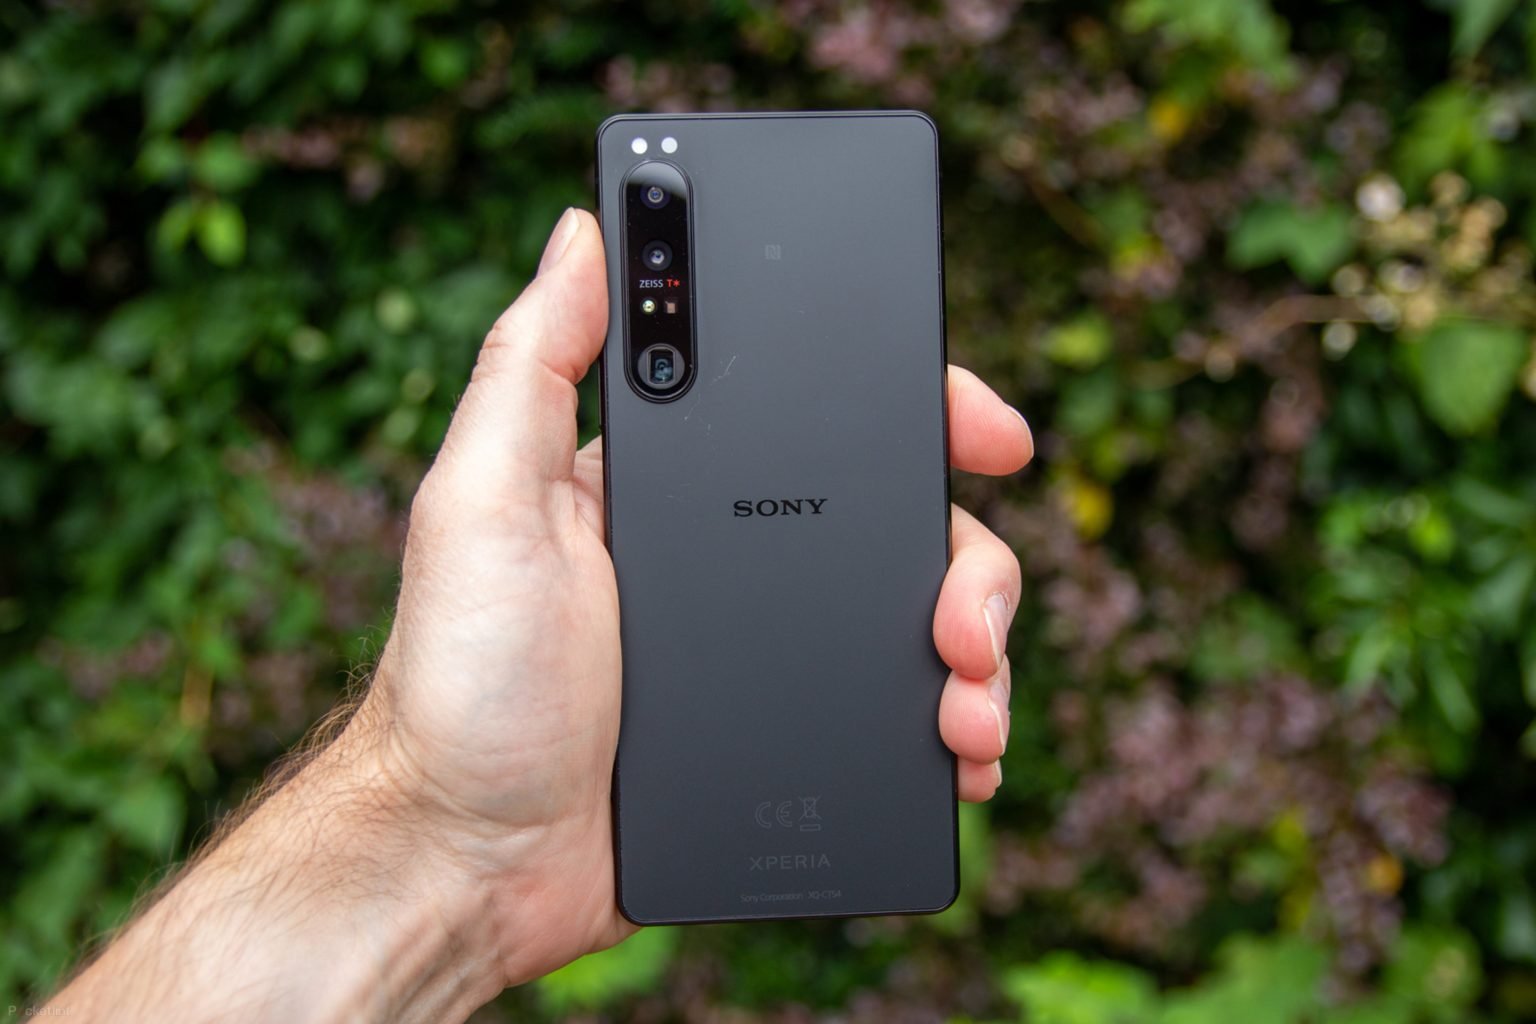 161595 Phones Review Xperia 1 Iv Review Image4 Inxcid4q2o